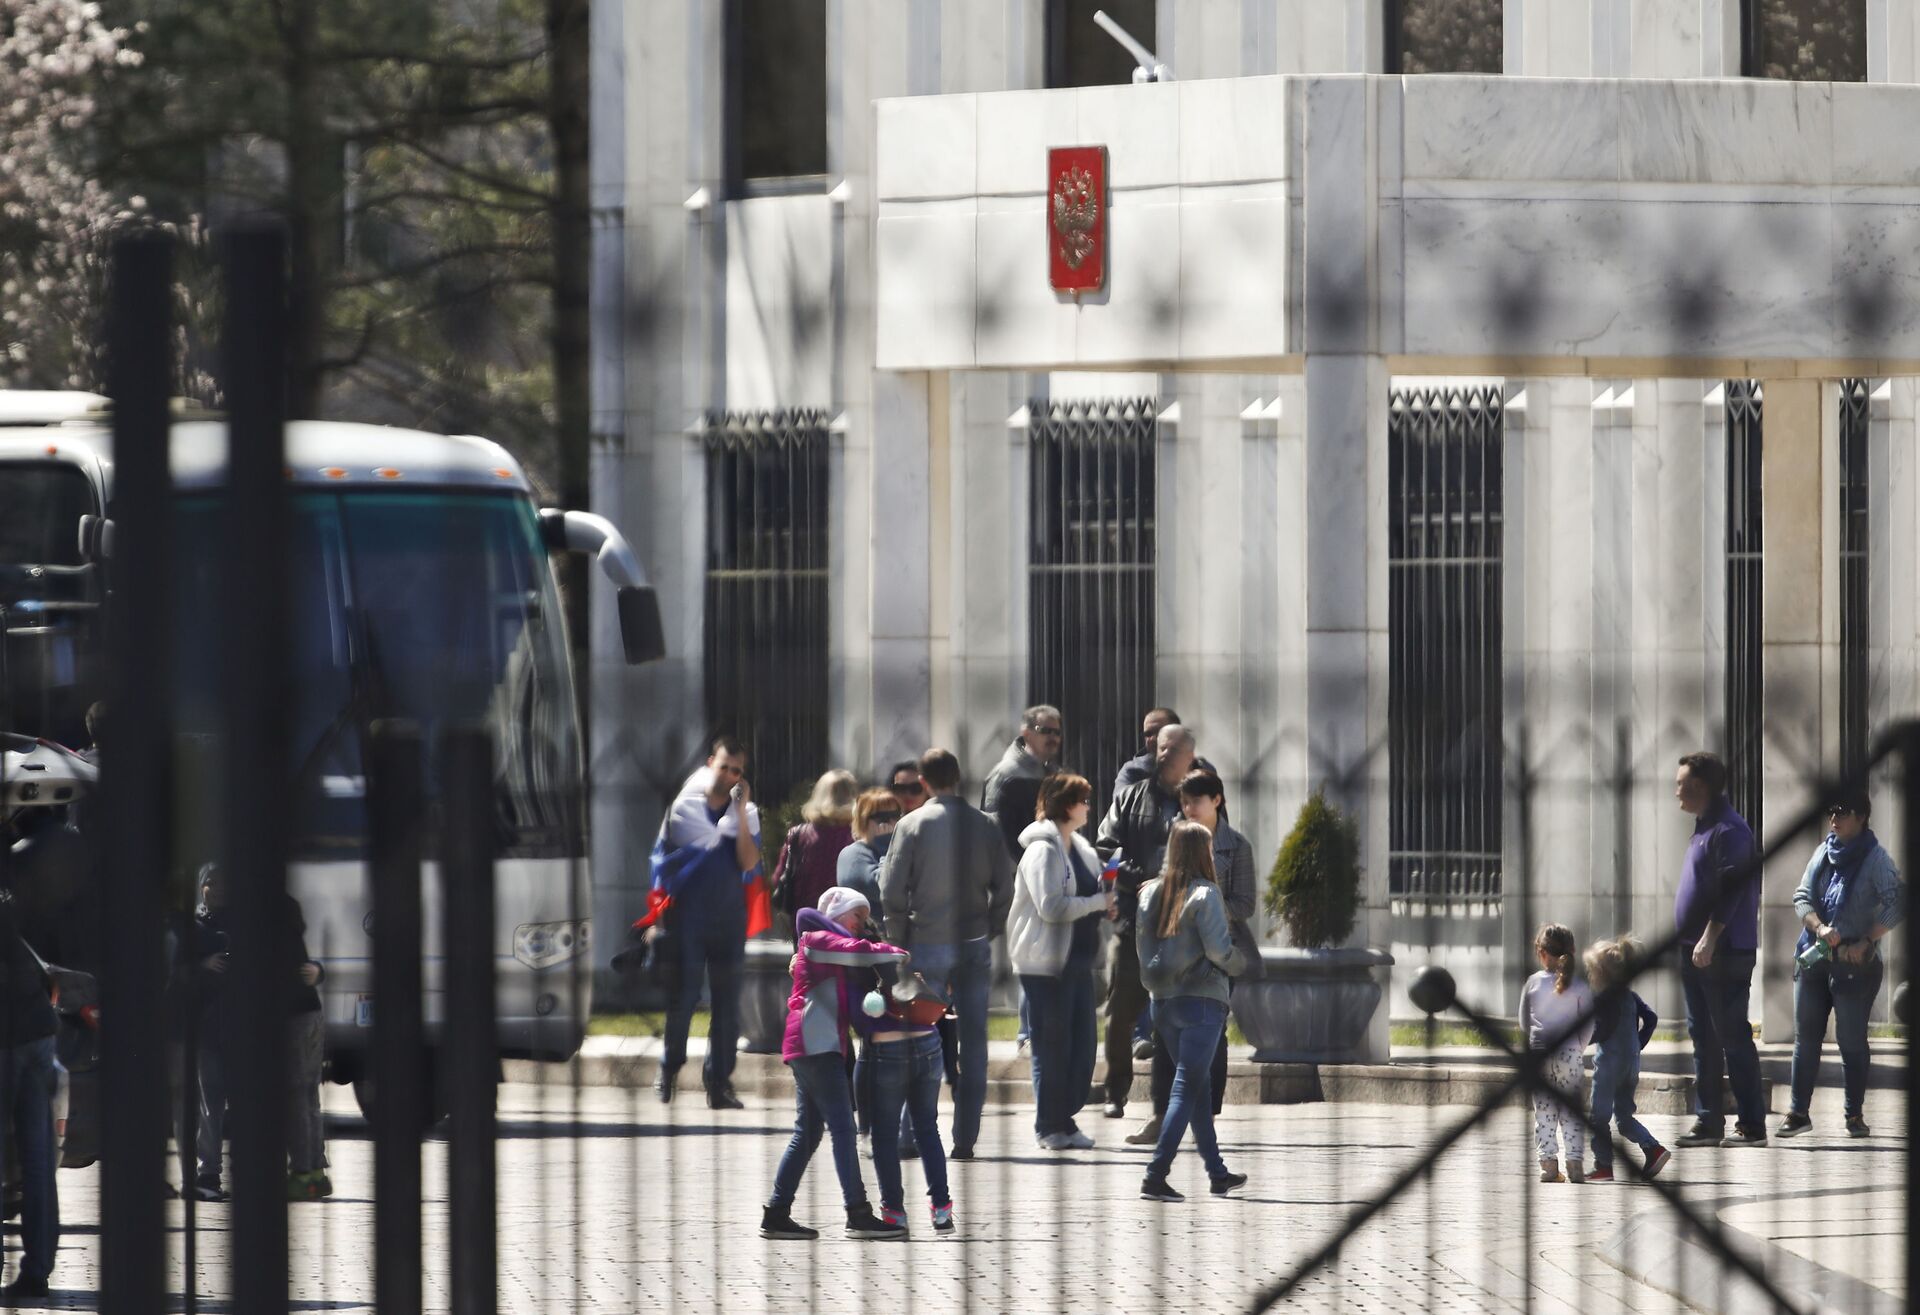 Two children embrace as people gather and board a bus at the Russian Embassy in Washington, Saturday, March 31, 2018 - Sputnik International, 1920, 07.09.2021